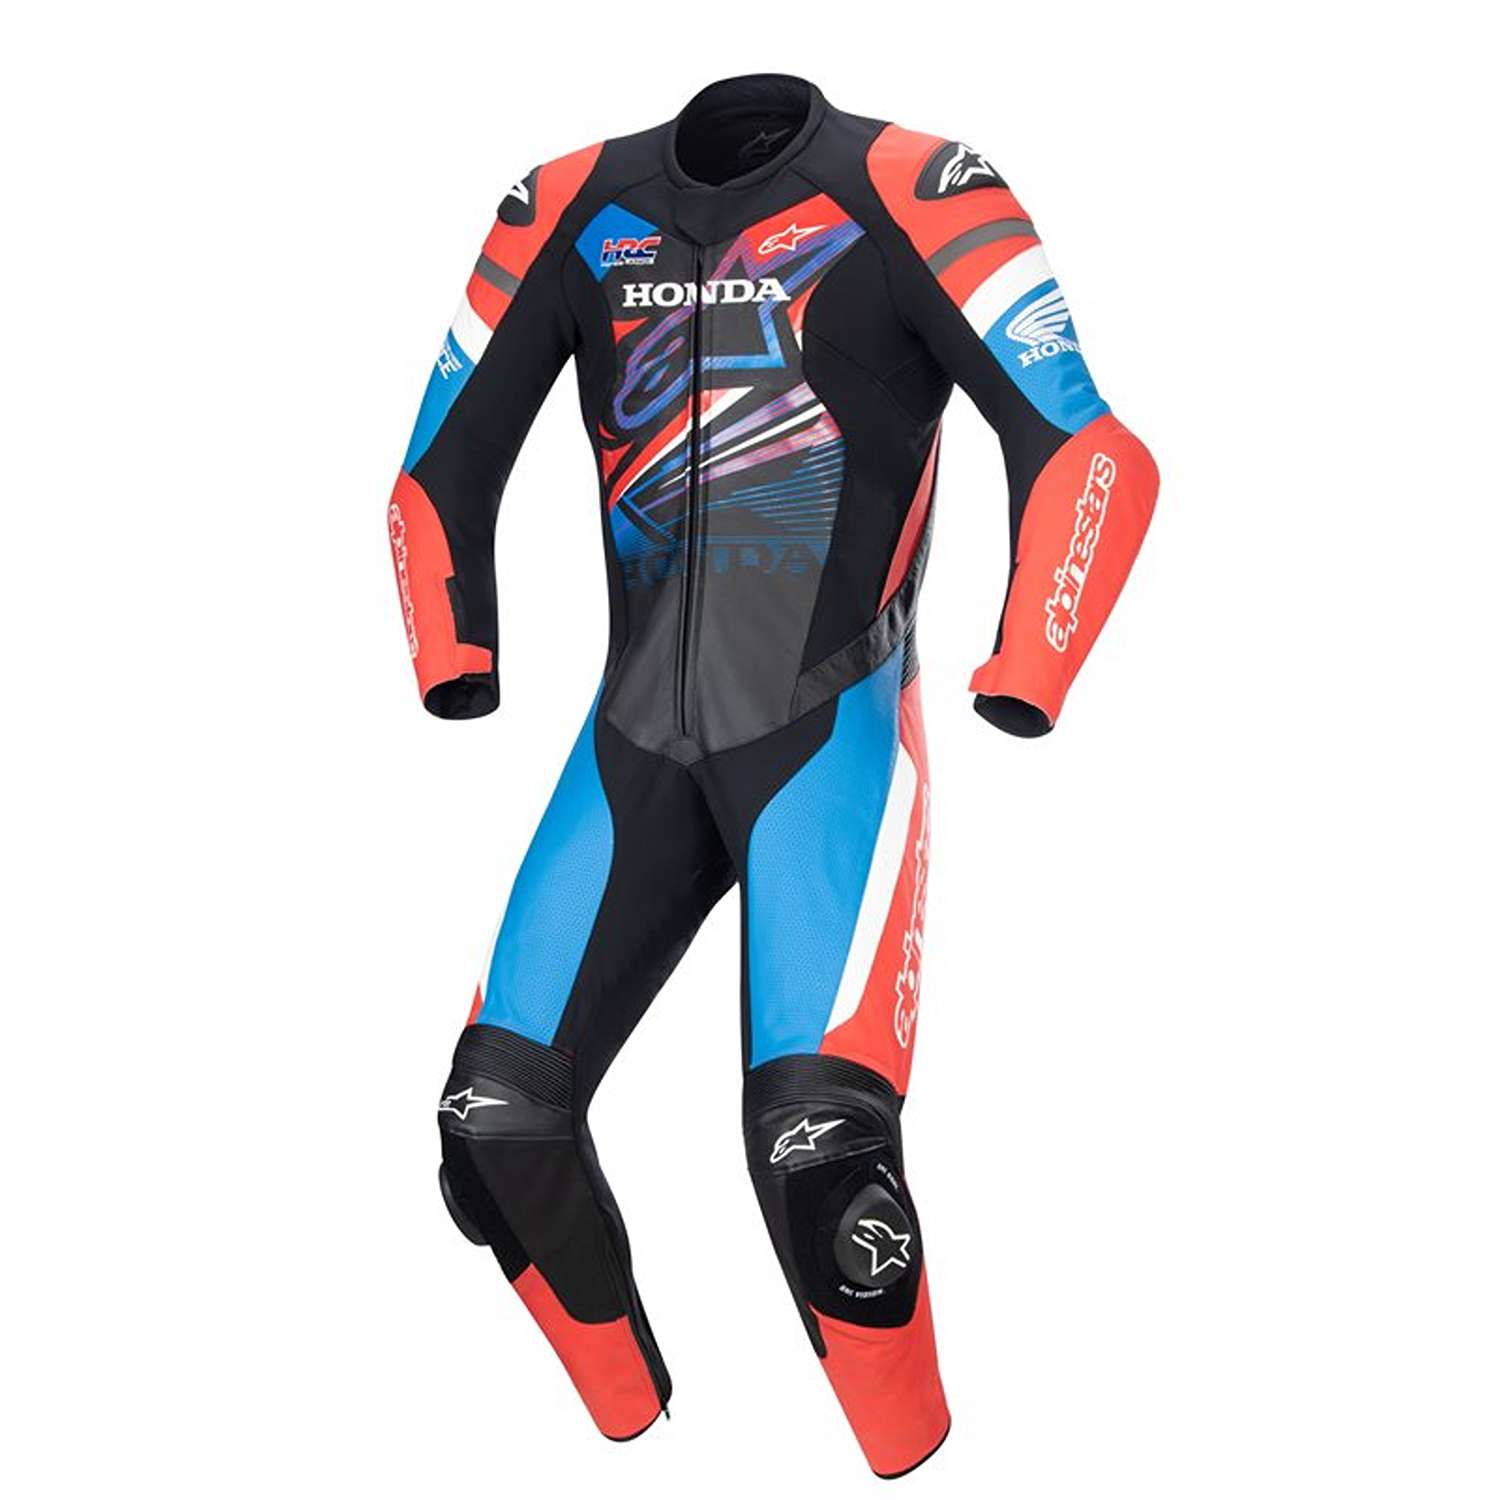 Image of Alpinestars Honda Gp Force Leather Suit Black Bright Red Blue Size 52 ID 8059347160306